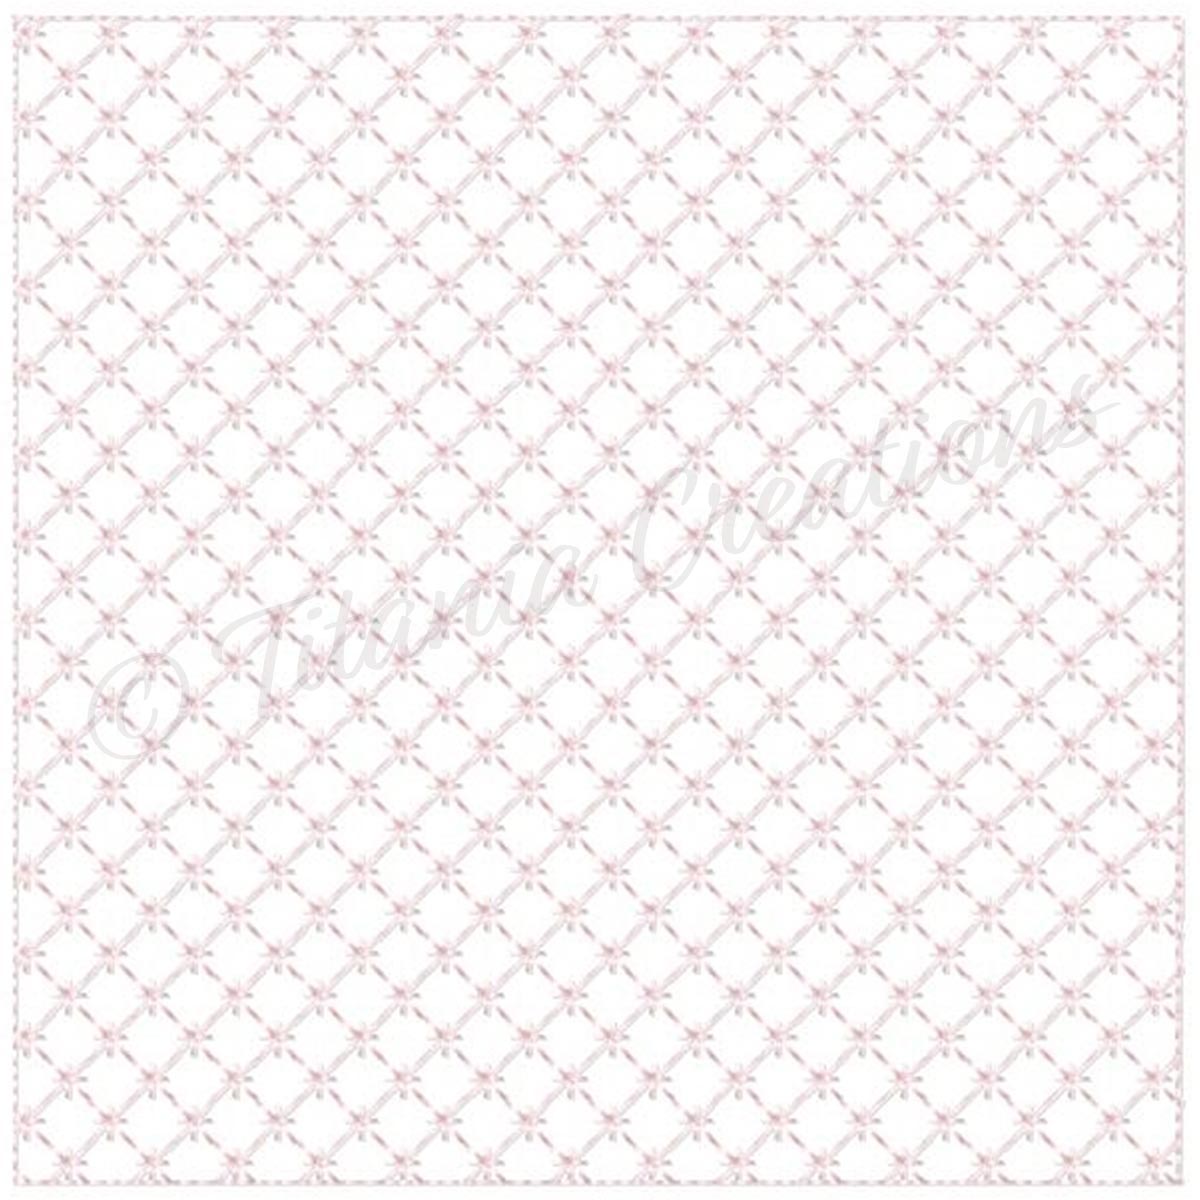 Studded Diamond Quilt Blocks 9 Sizes Included